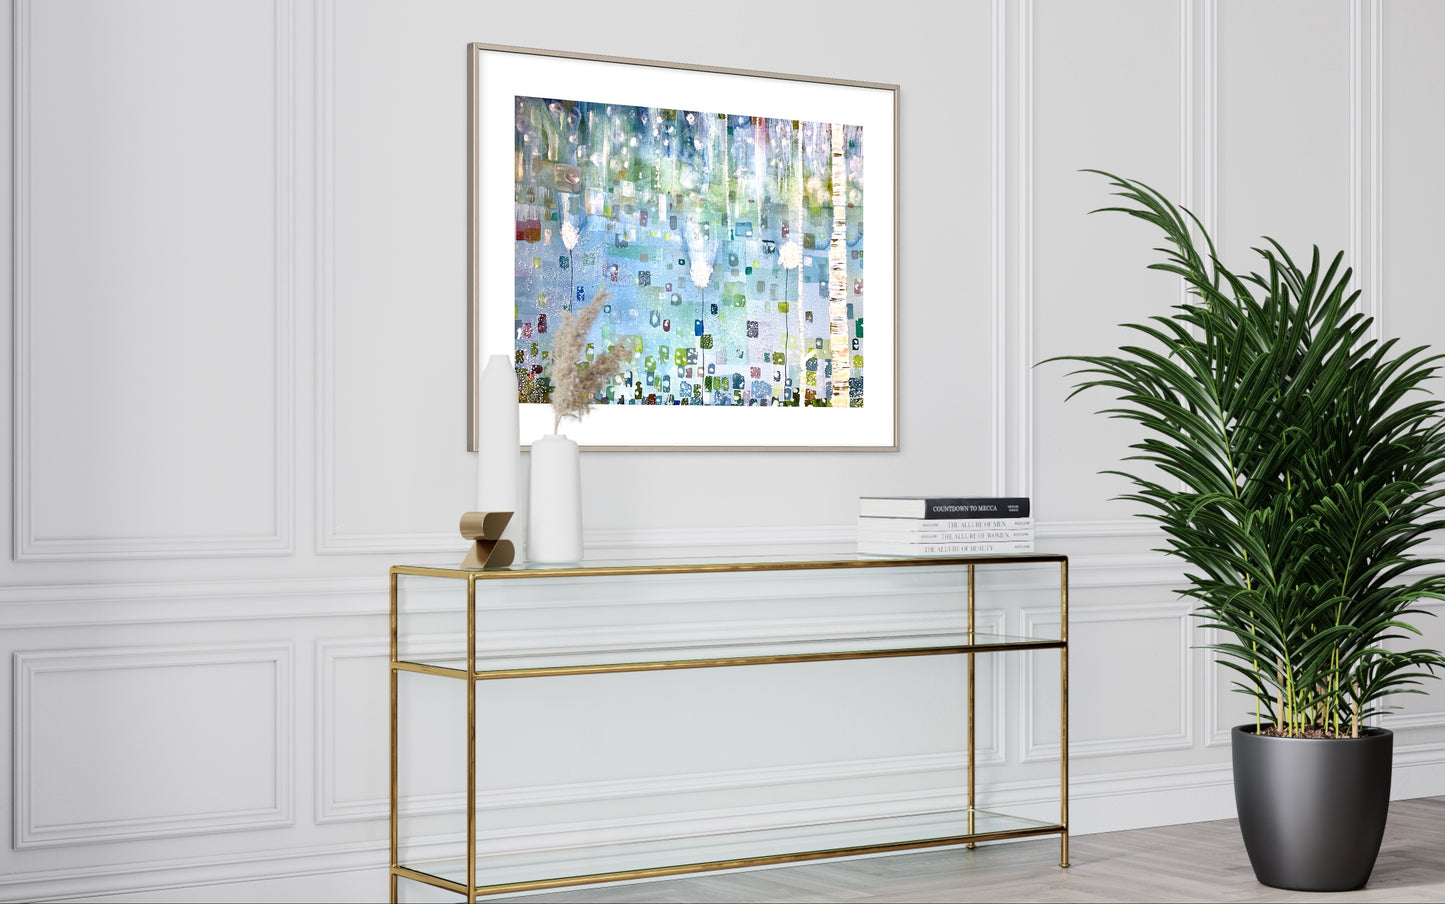 A1 Limited Edition Print - Dandelions and Birches